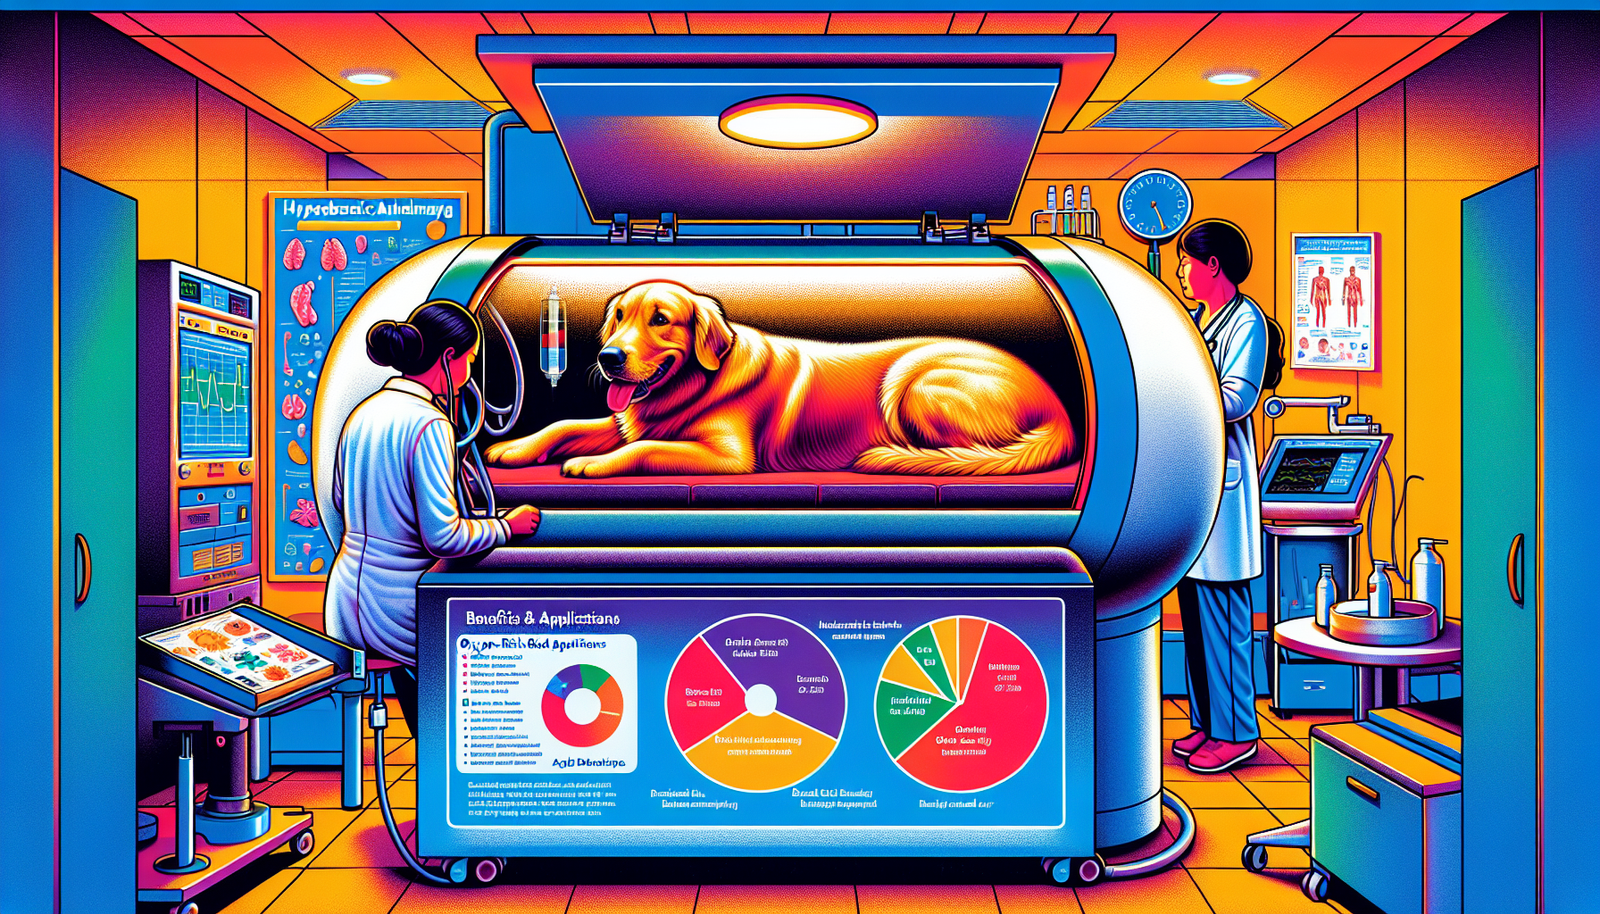 Hyperbaric Animal Therapy